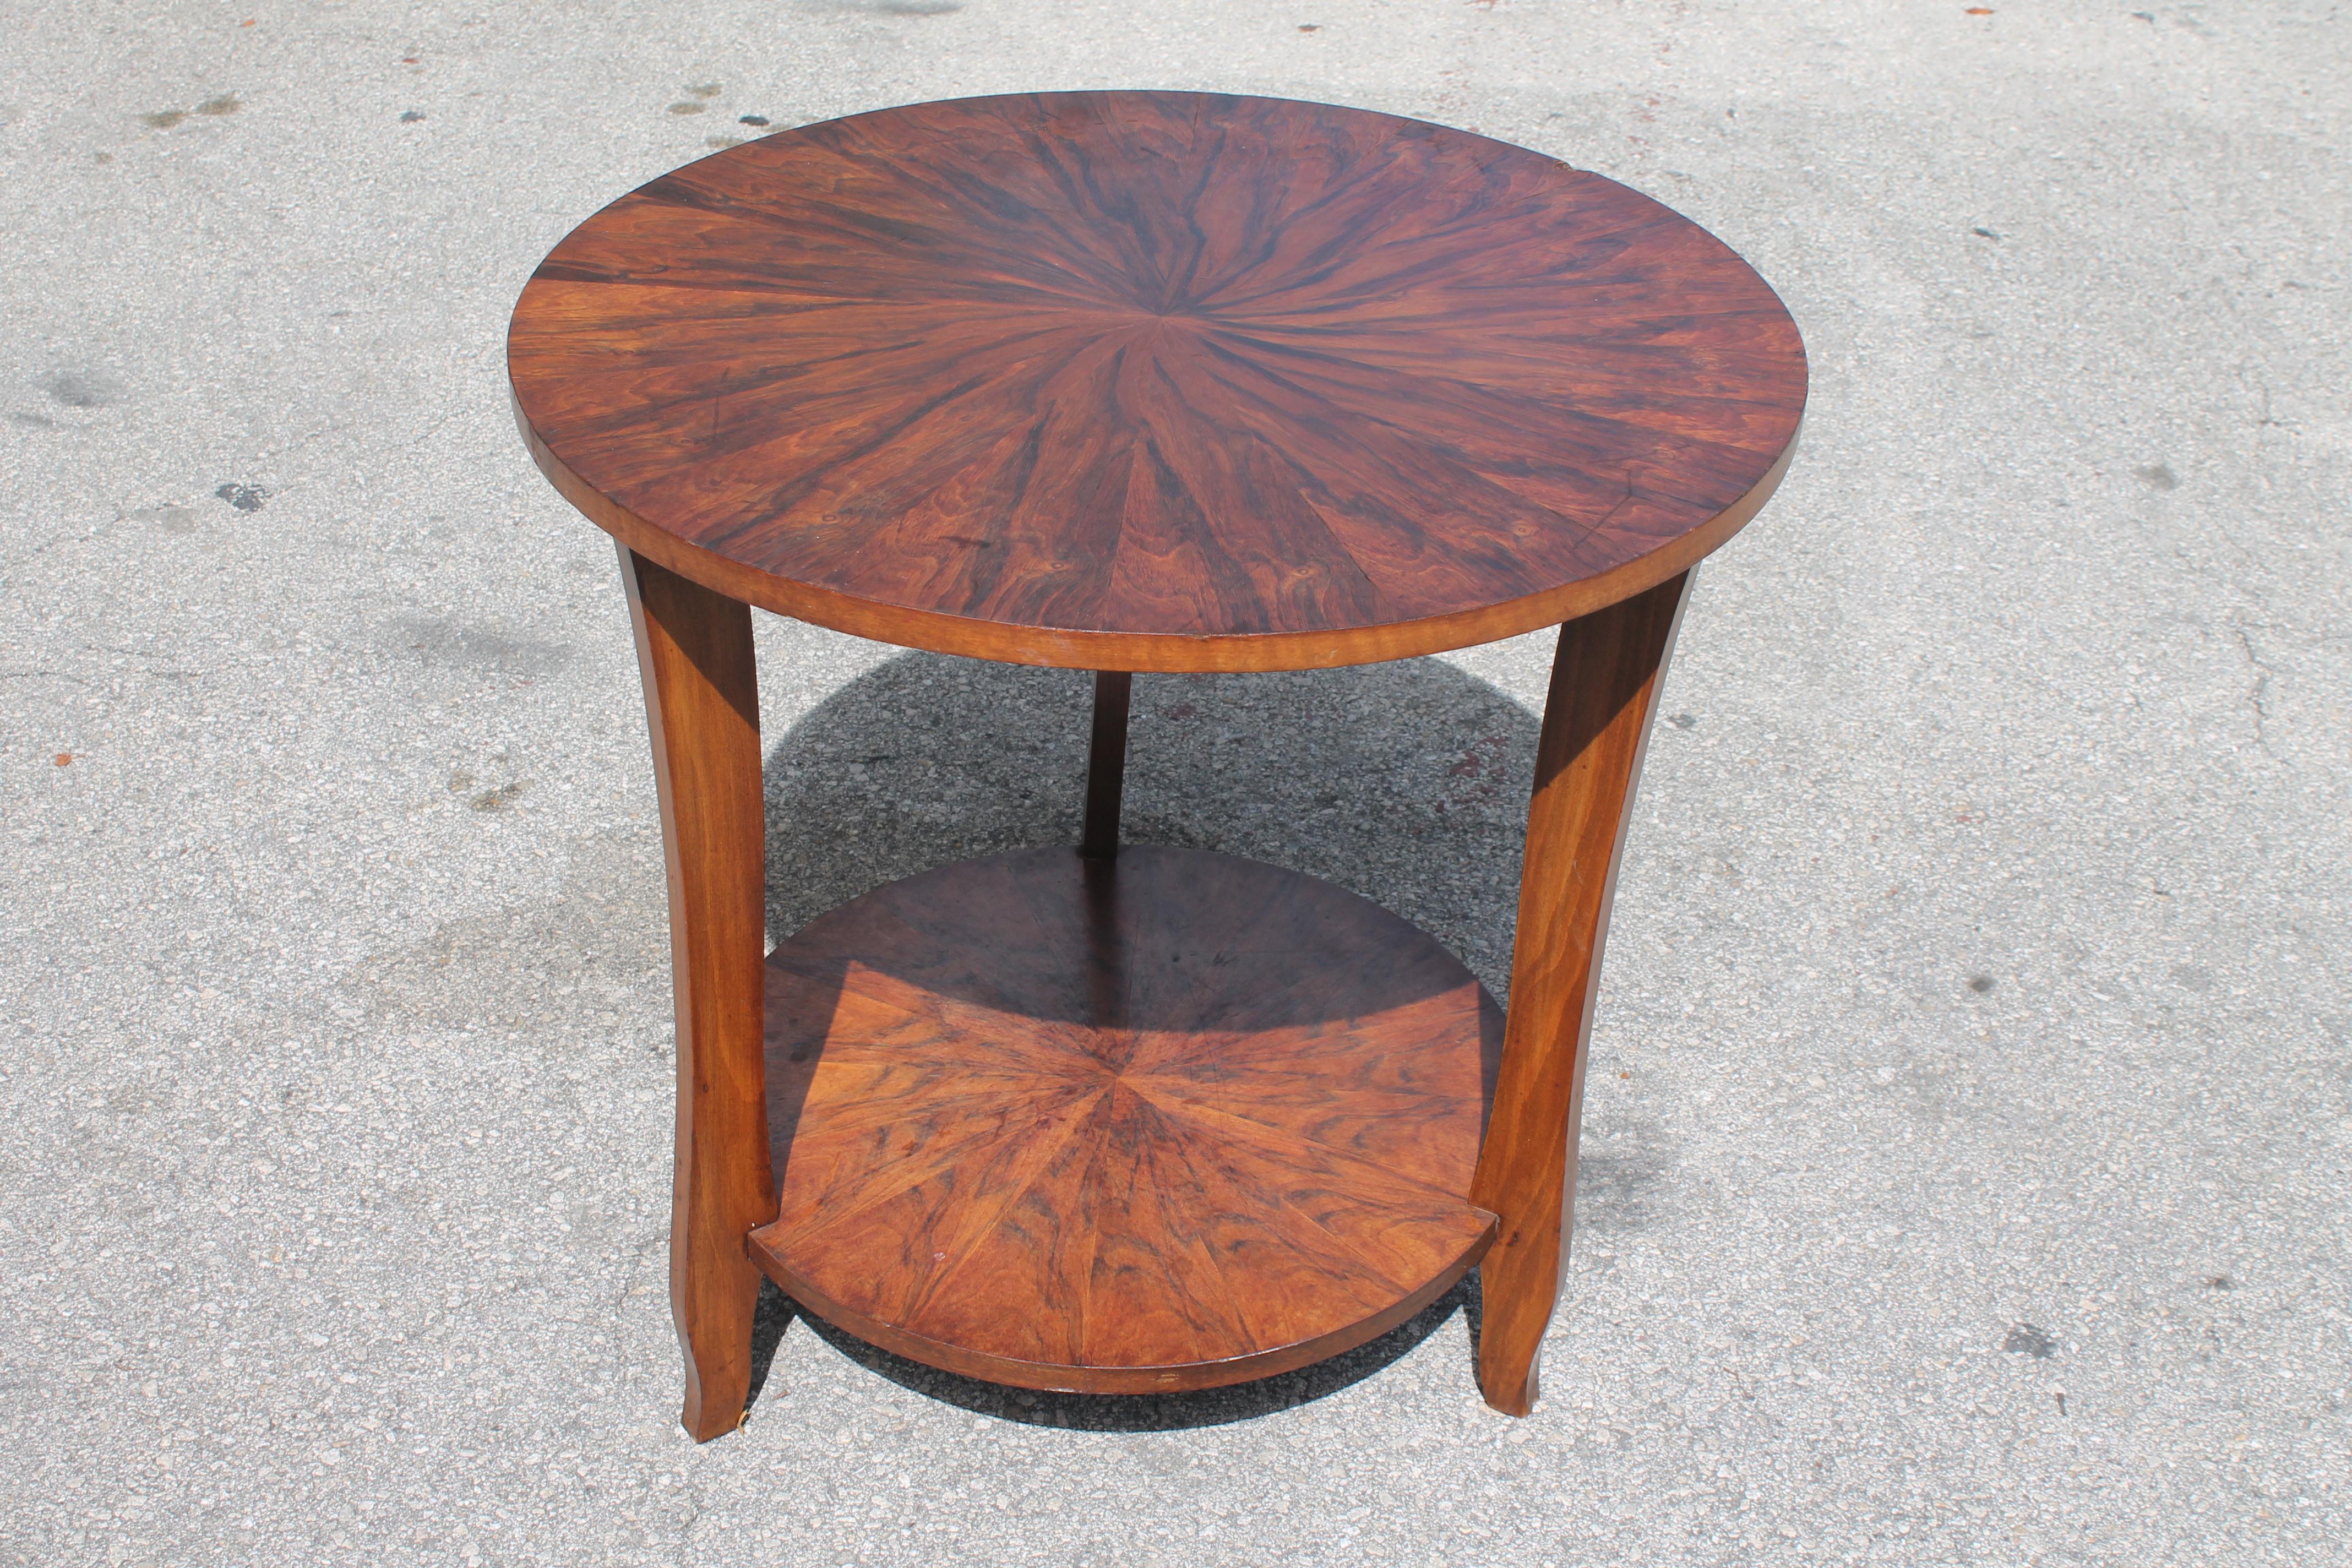 1930's French Art Deco Round Exotic Walnut Side Table/ Accent Table In Good Condition For Sale In Opa Locka, FL